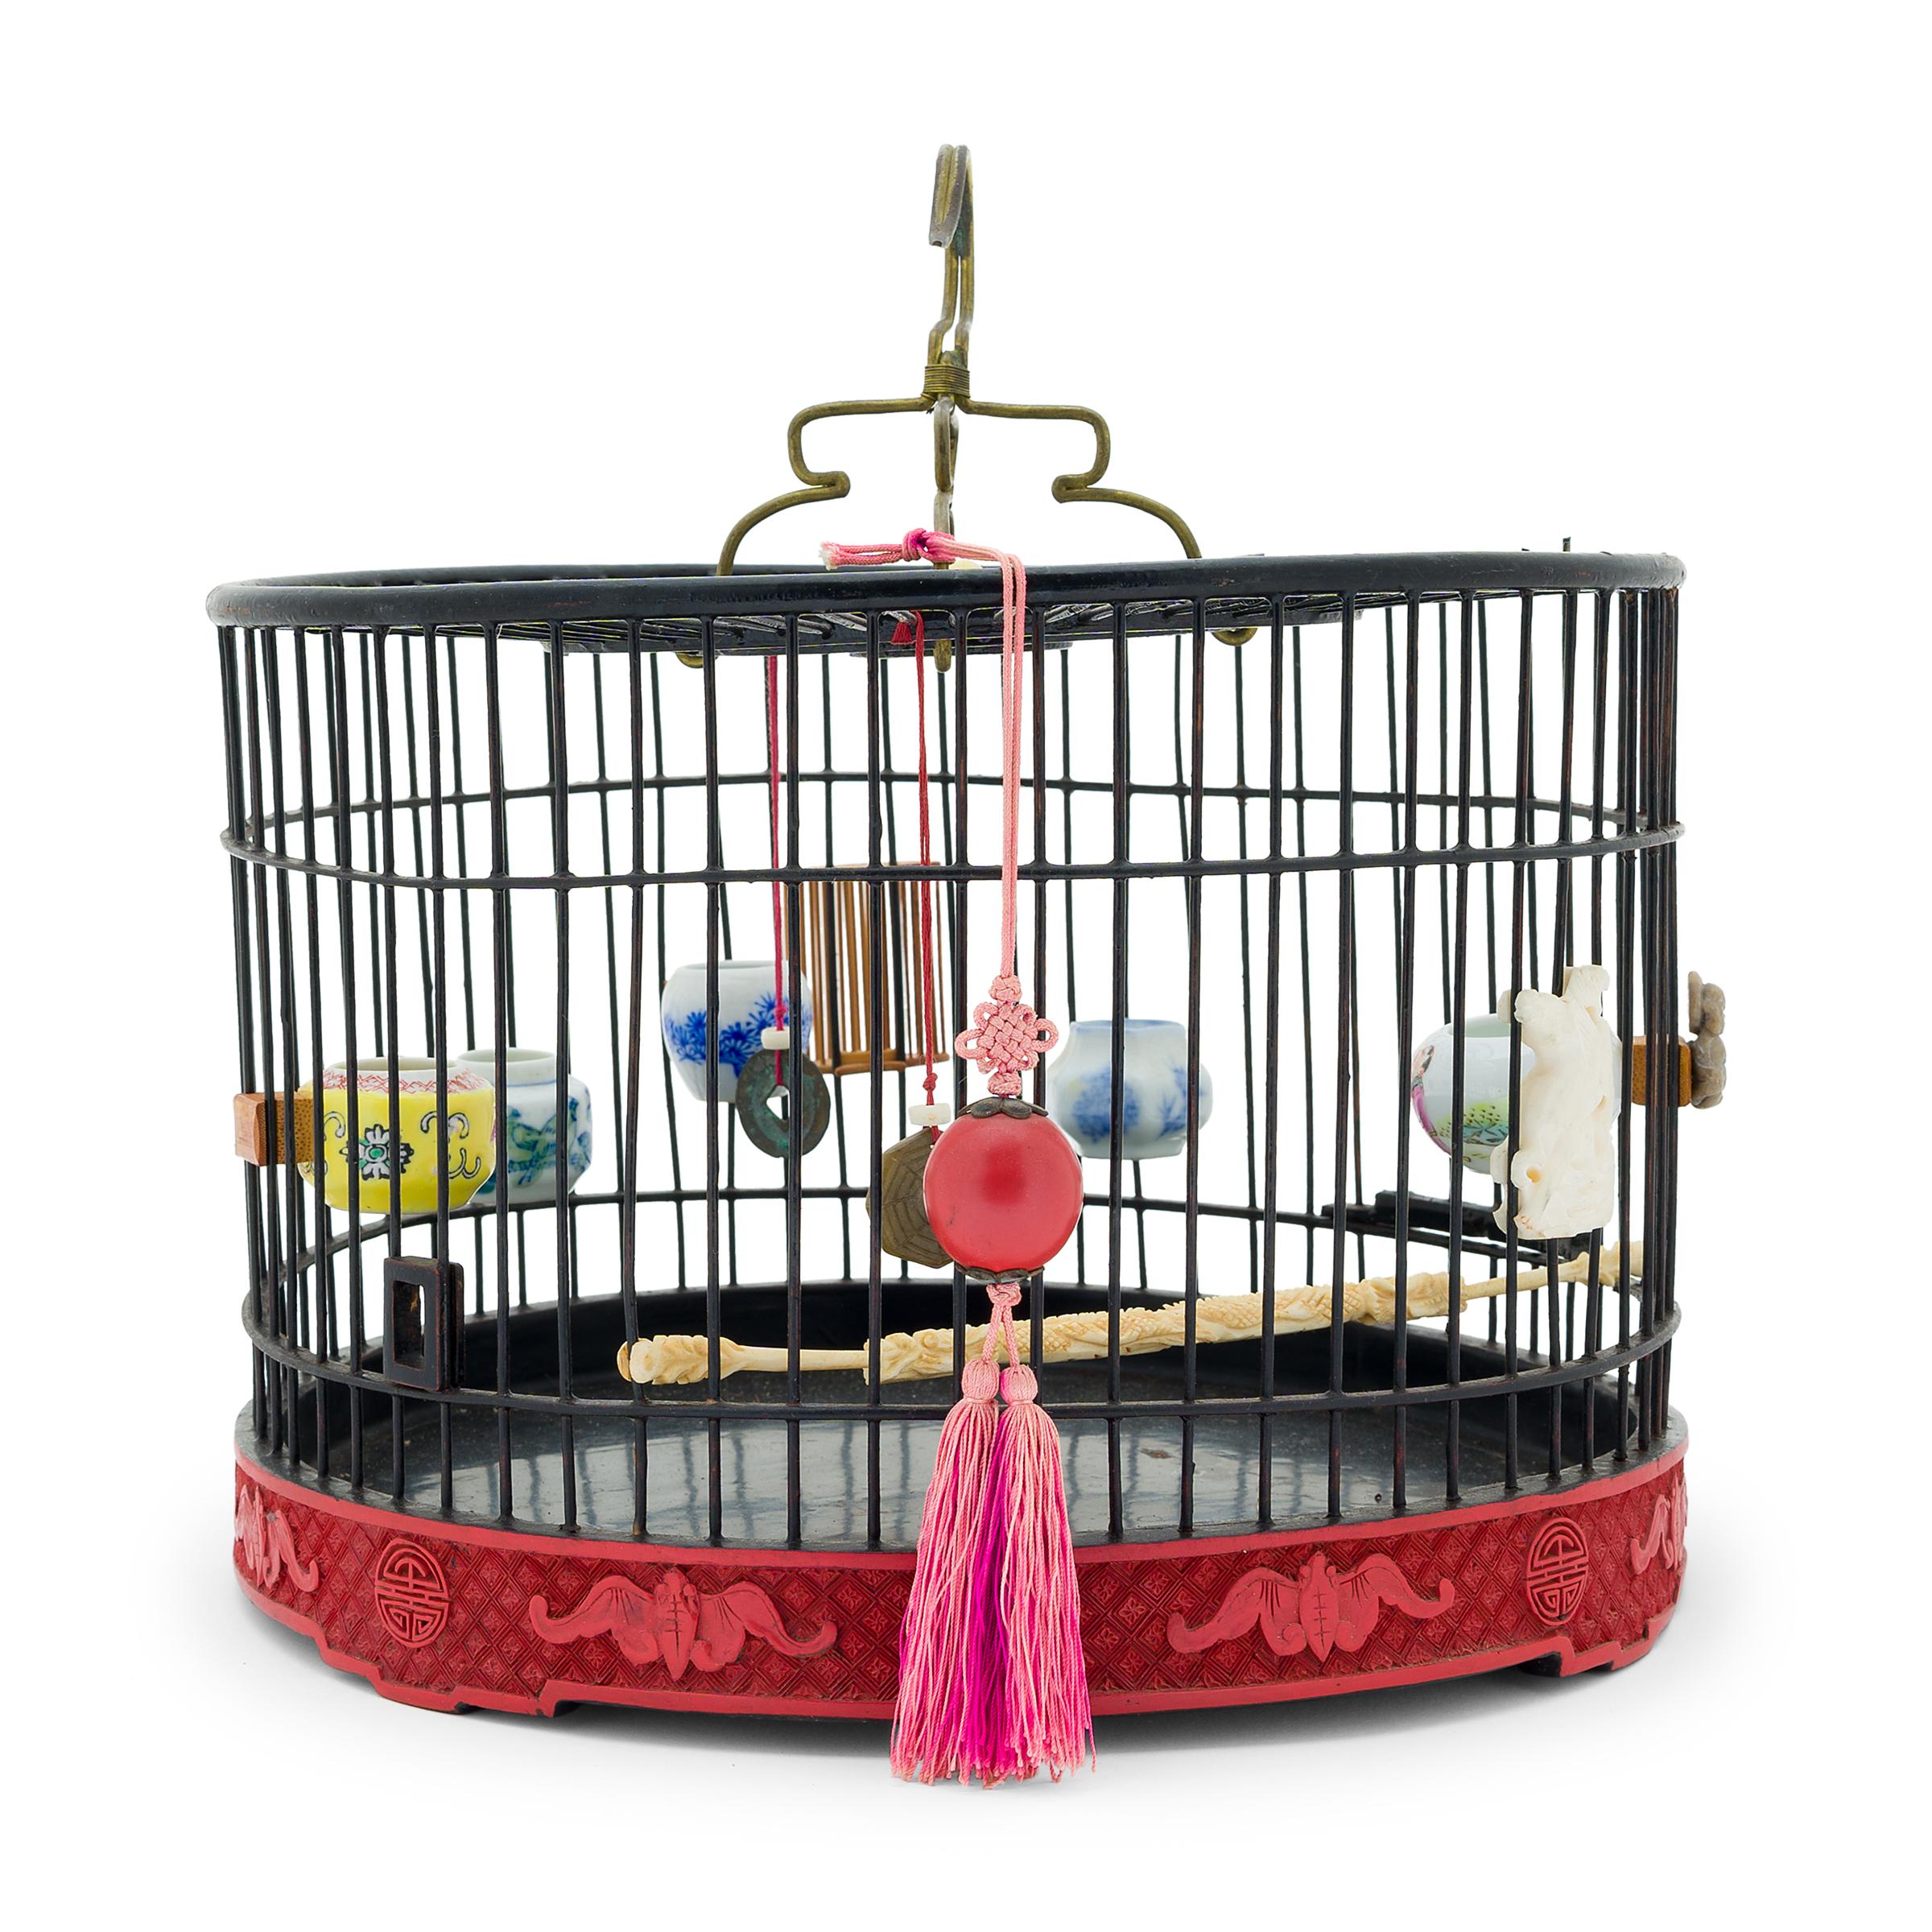 Qing Round Chinese Cinnabar Lacquer Birdcage, circa 1900